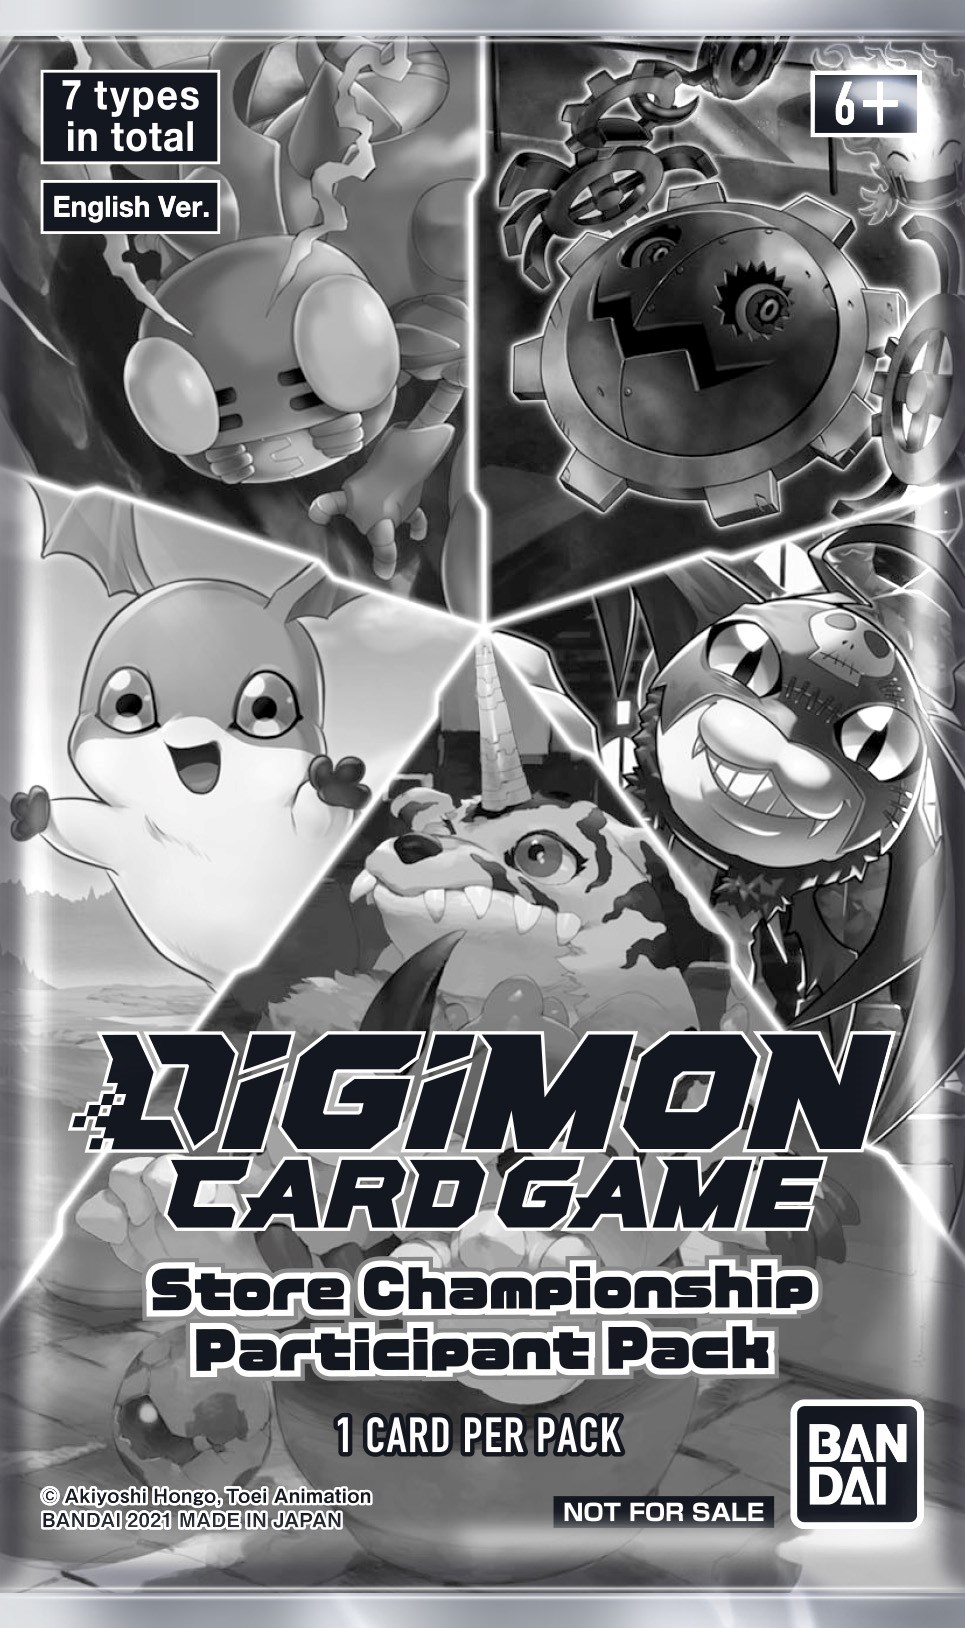 store-championship-participant-pack-digimon-promotion-cards-digimon-card-game